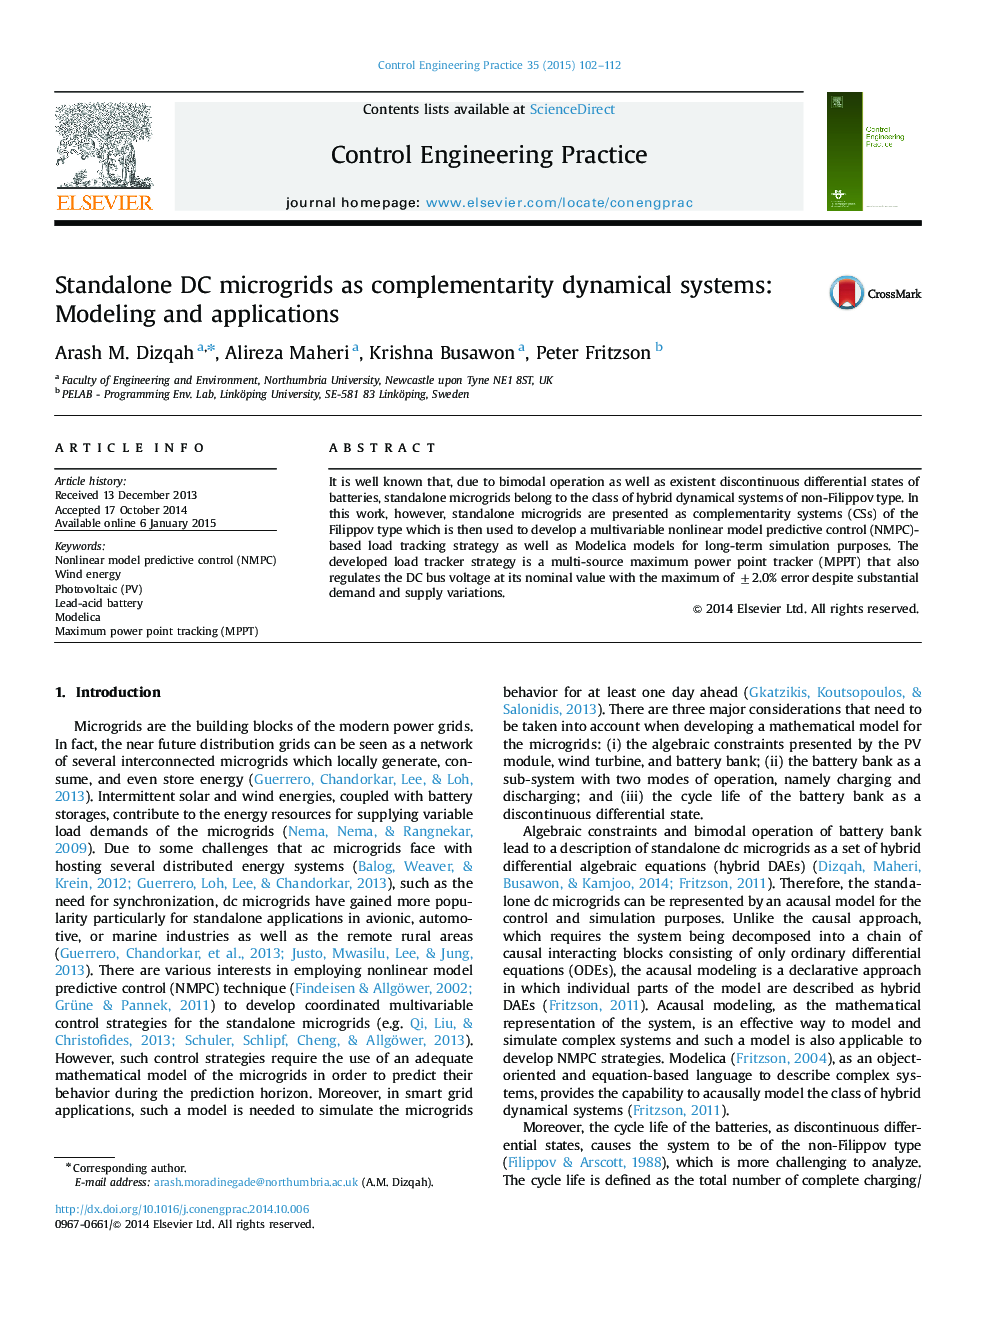 Standalone DC microgrids as complementarity dynamical systems: Modeling and applications